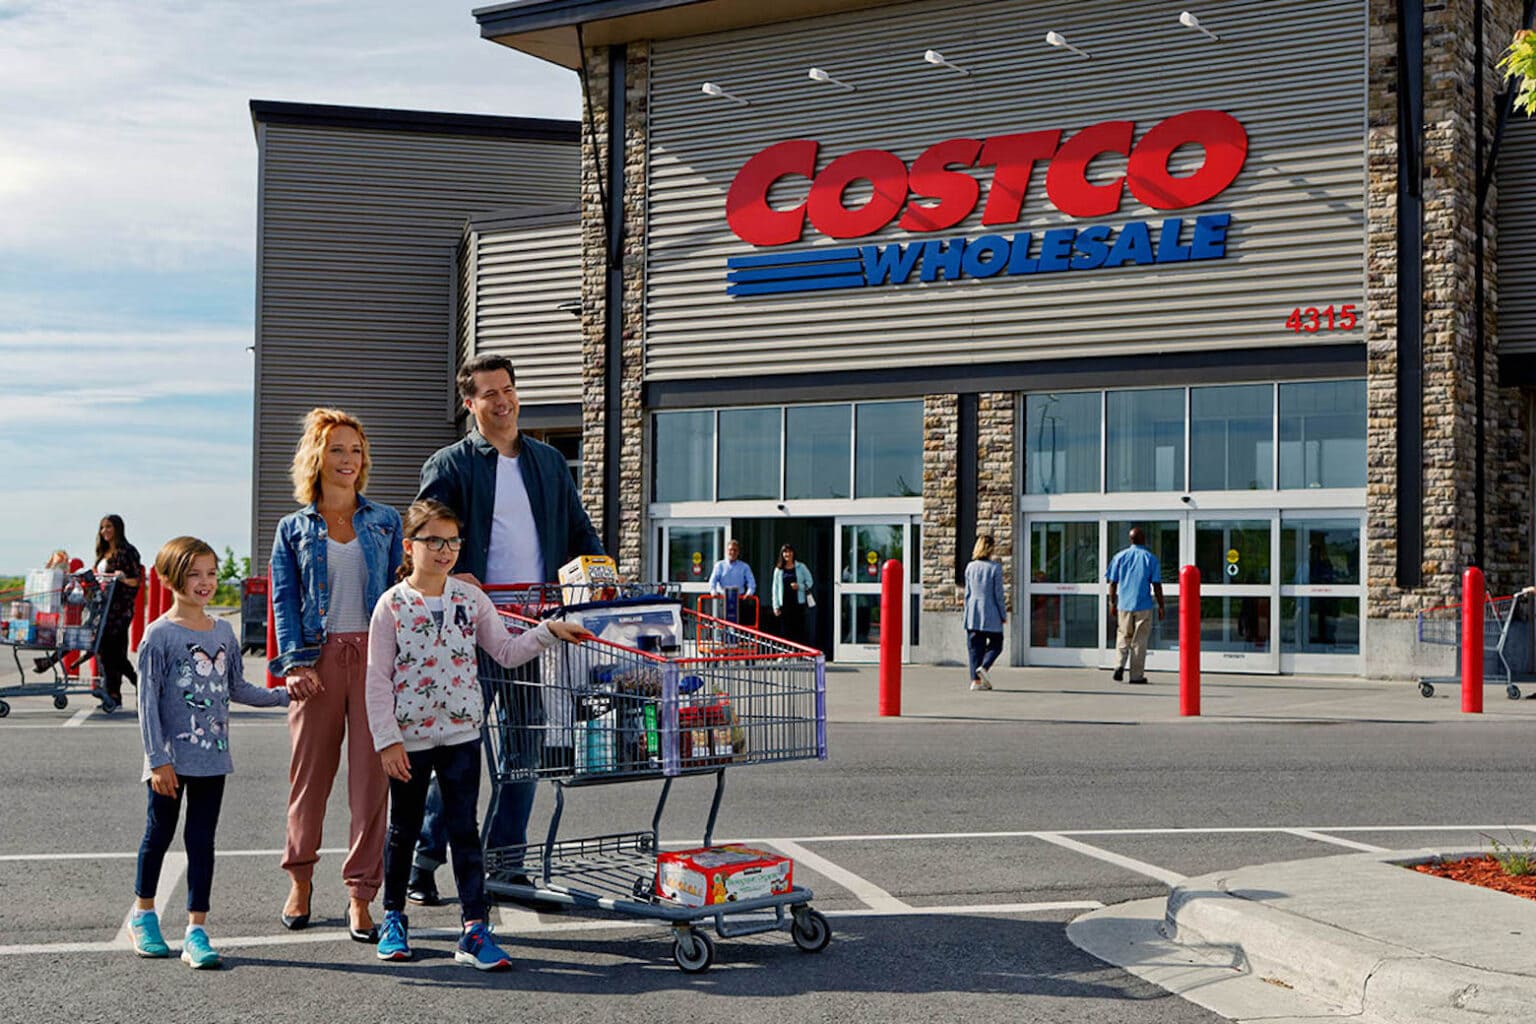 Grab a one-year membership at Costco and $40 Digital Shop Card* for only $60 during Cyber Week.